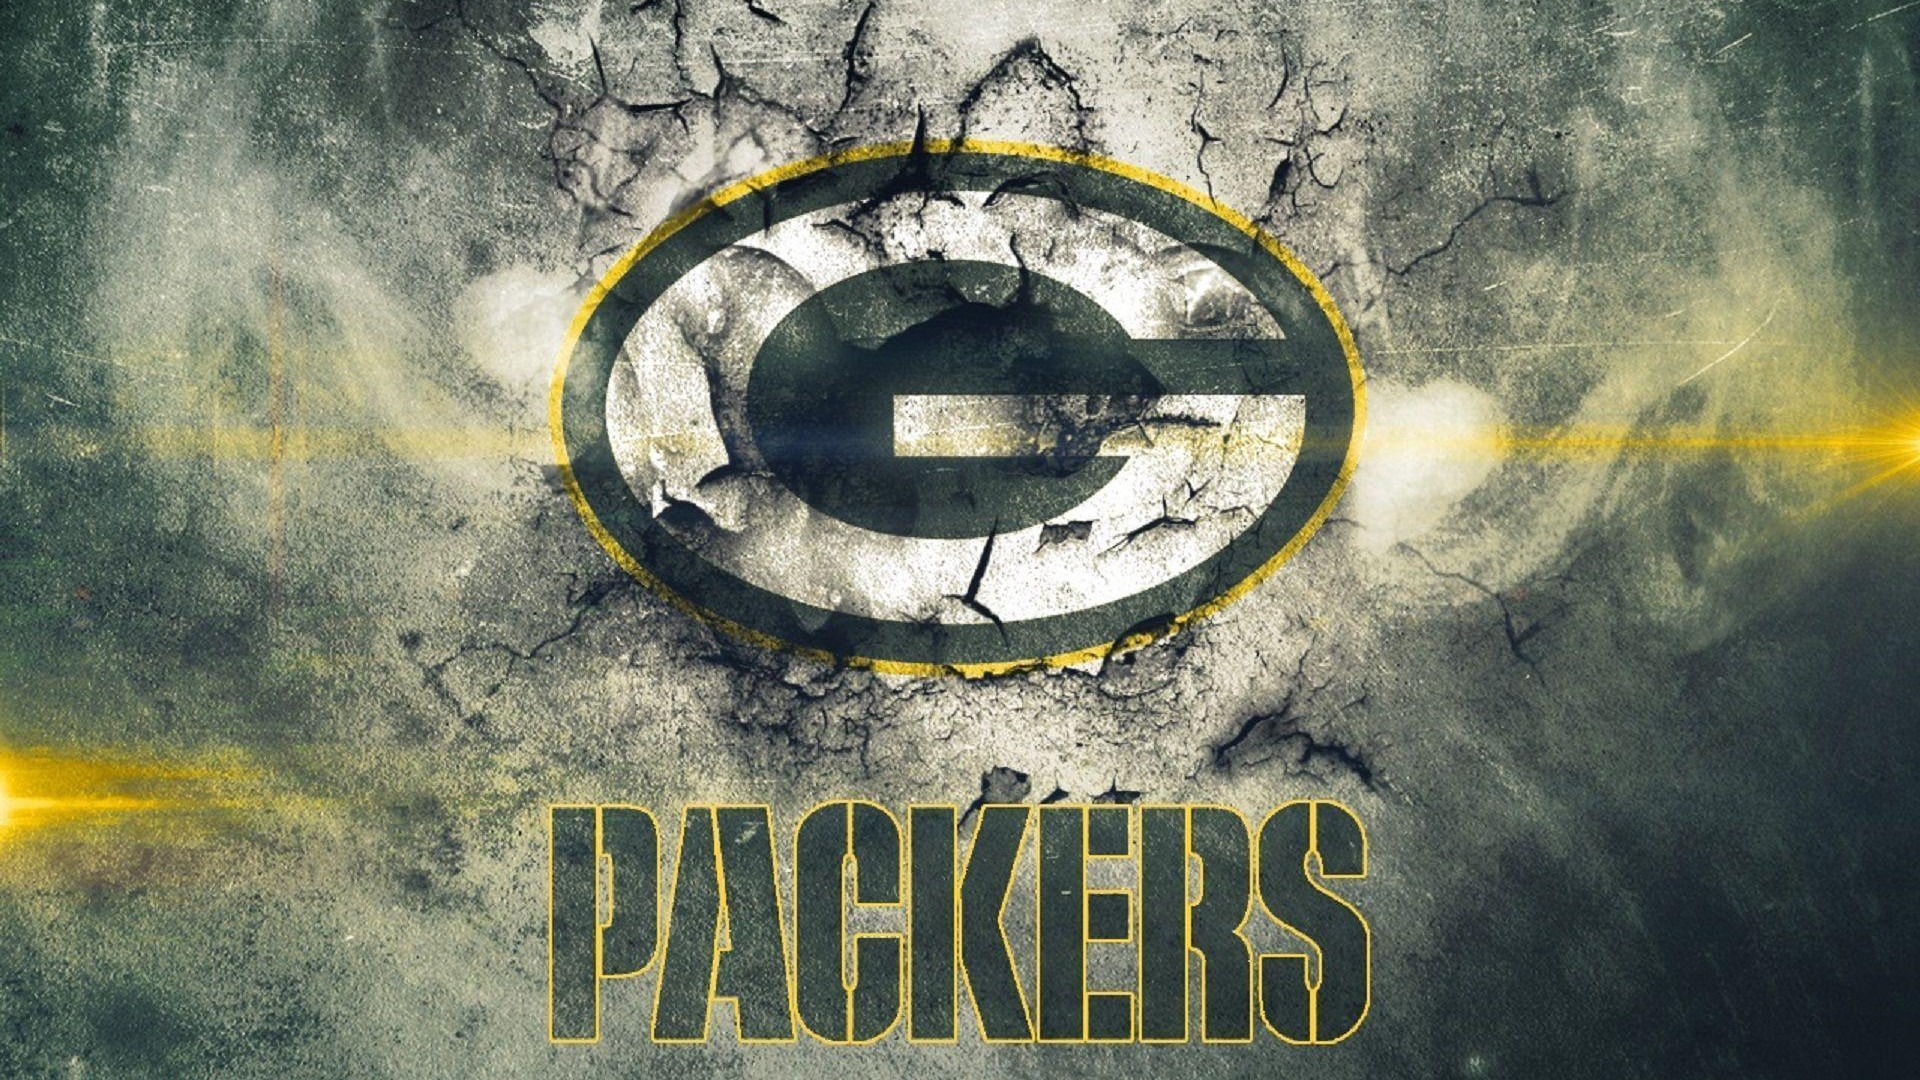 Green Bay Packers NFL For Mac with resolution 1920x1080 pixel. You can make this wallpaper for your Mac or Windows Desktop Background, iPhone, Android or Tablet and another Smartphone device